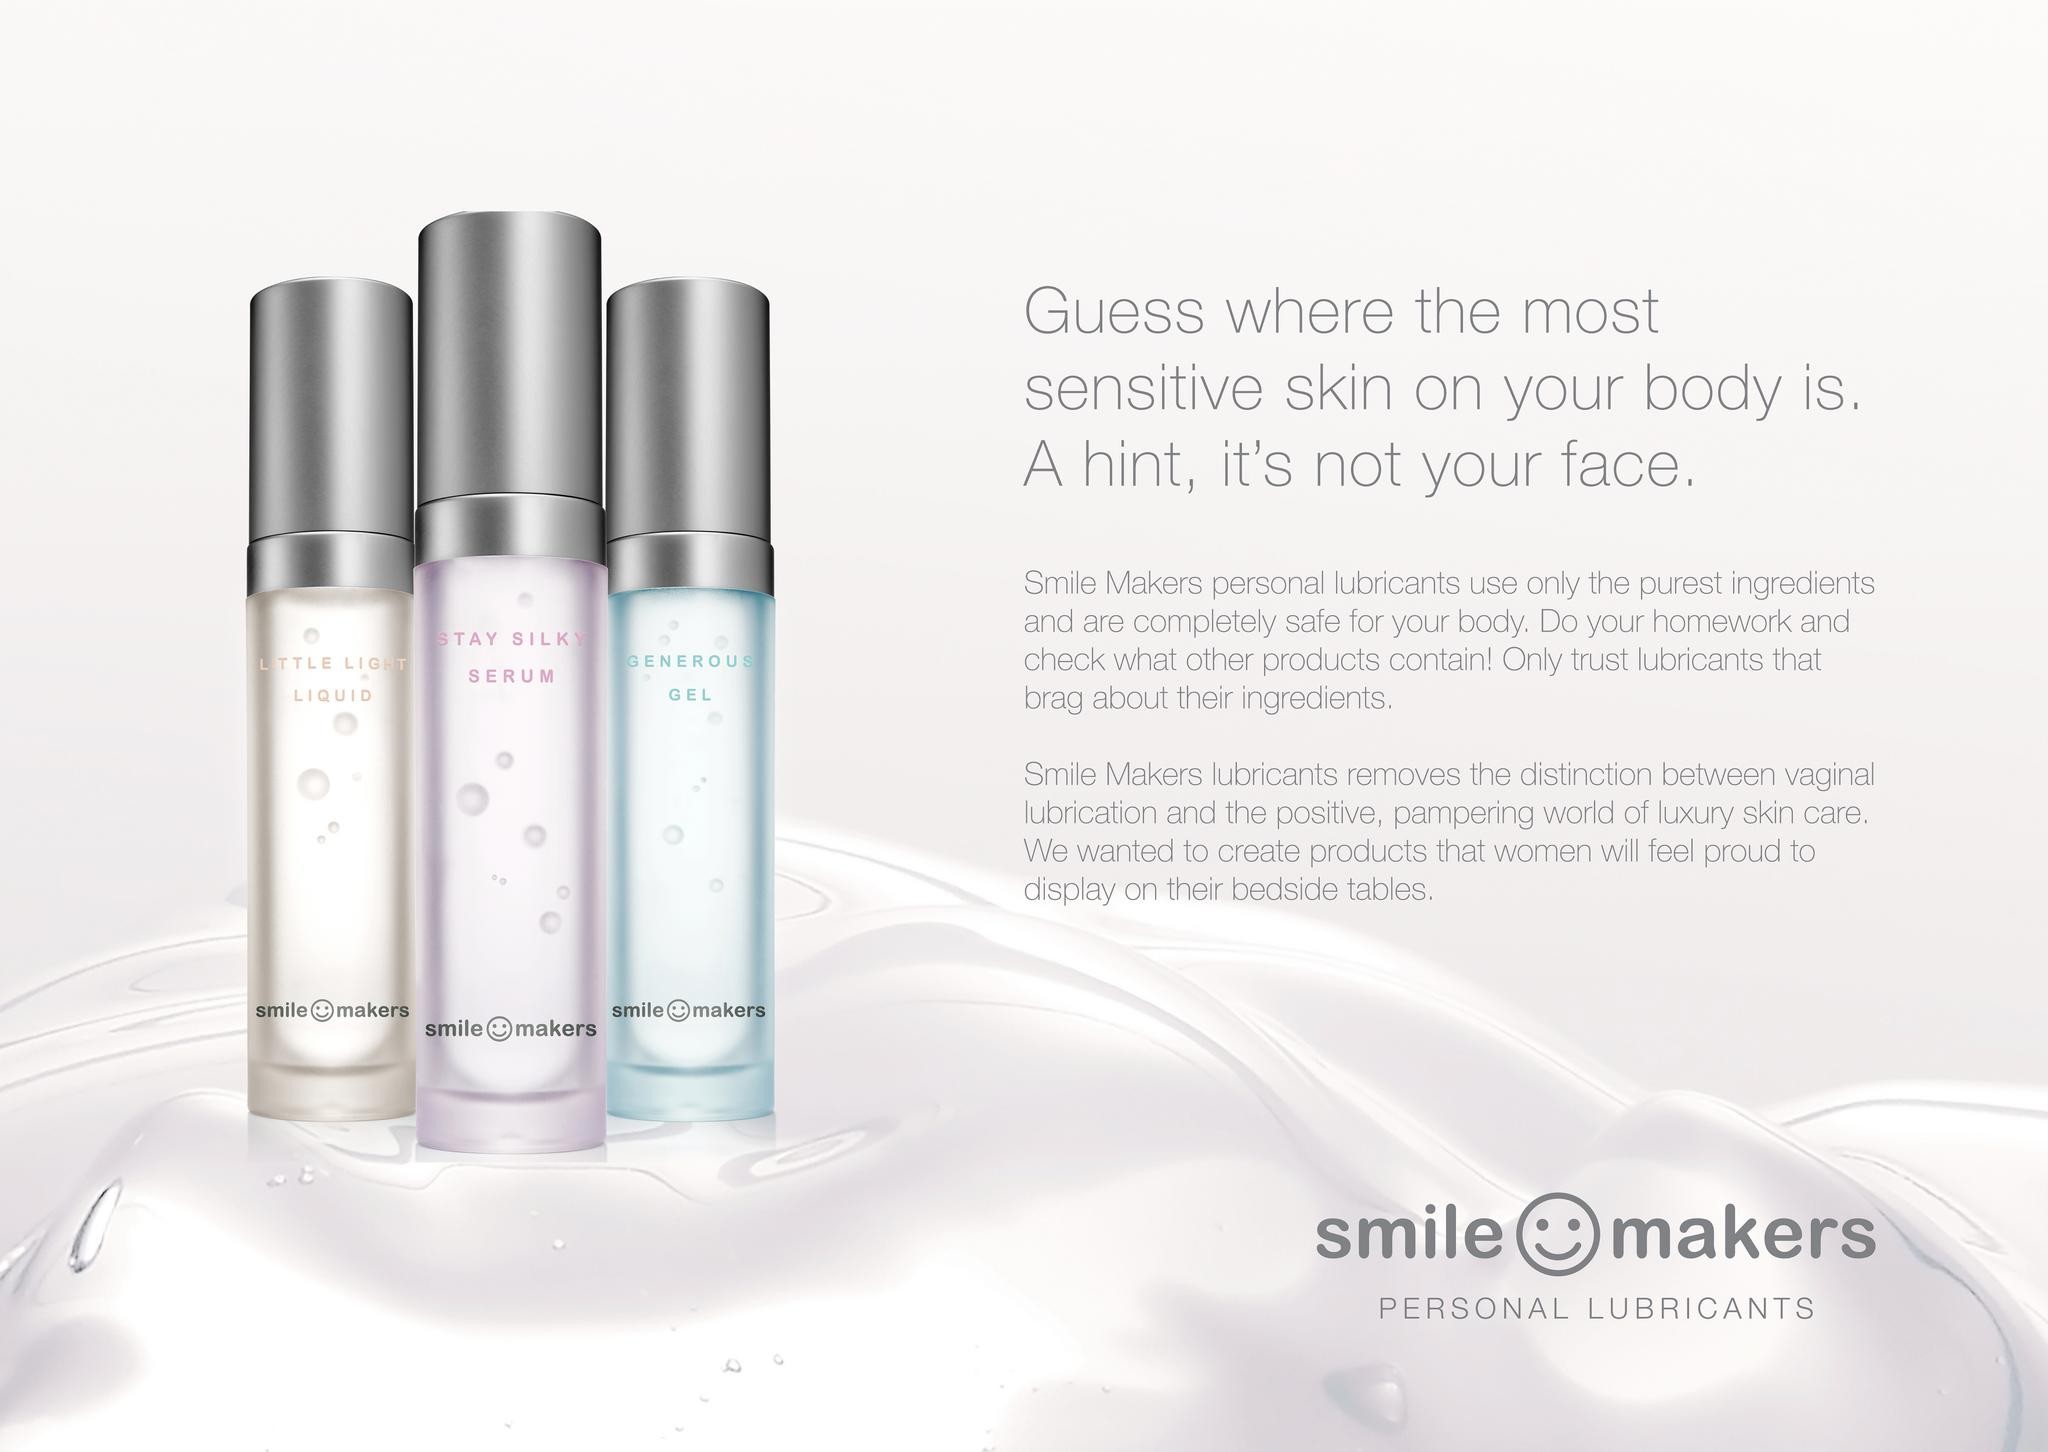 Smile Makers Personal Lubricants